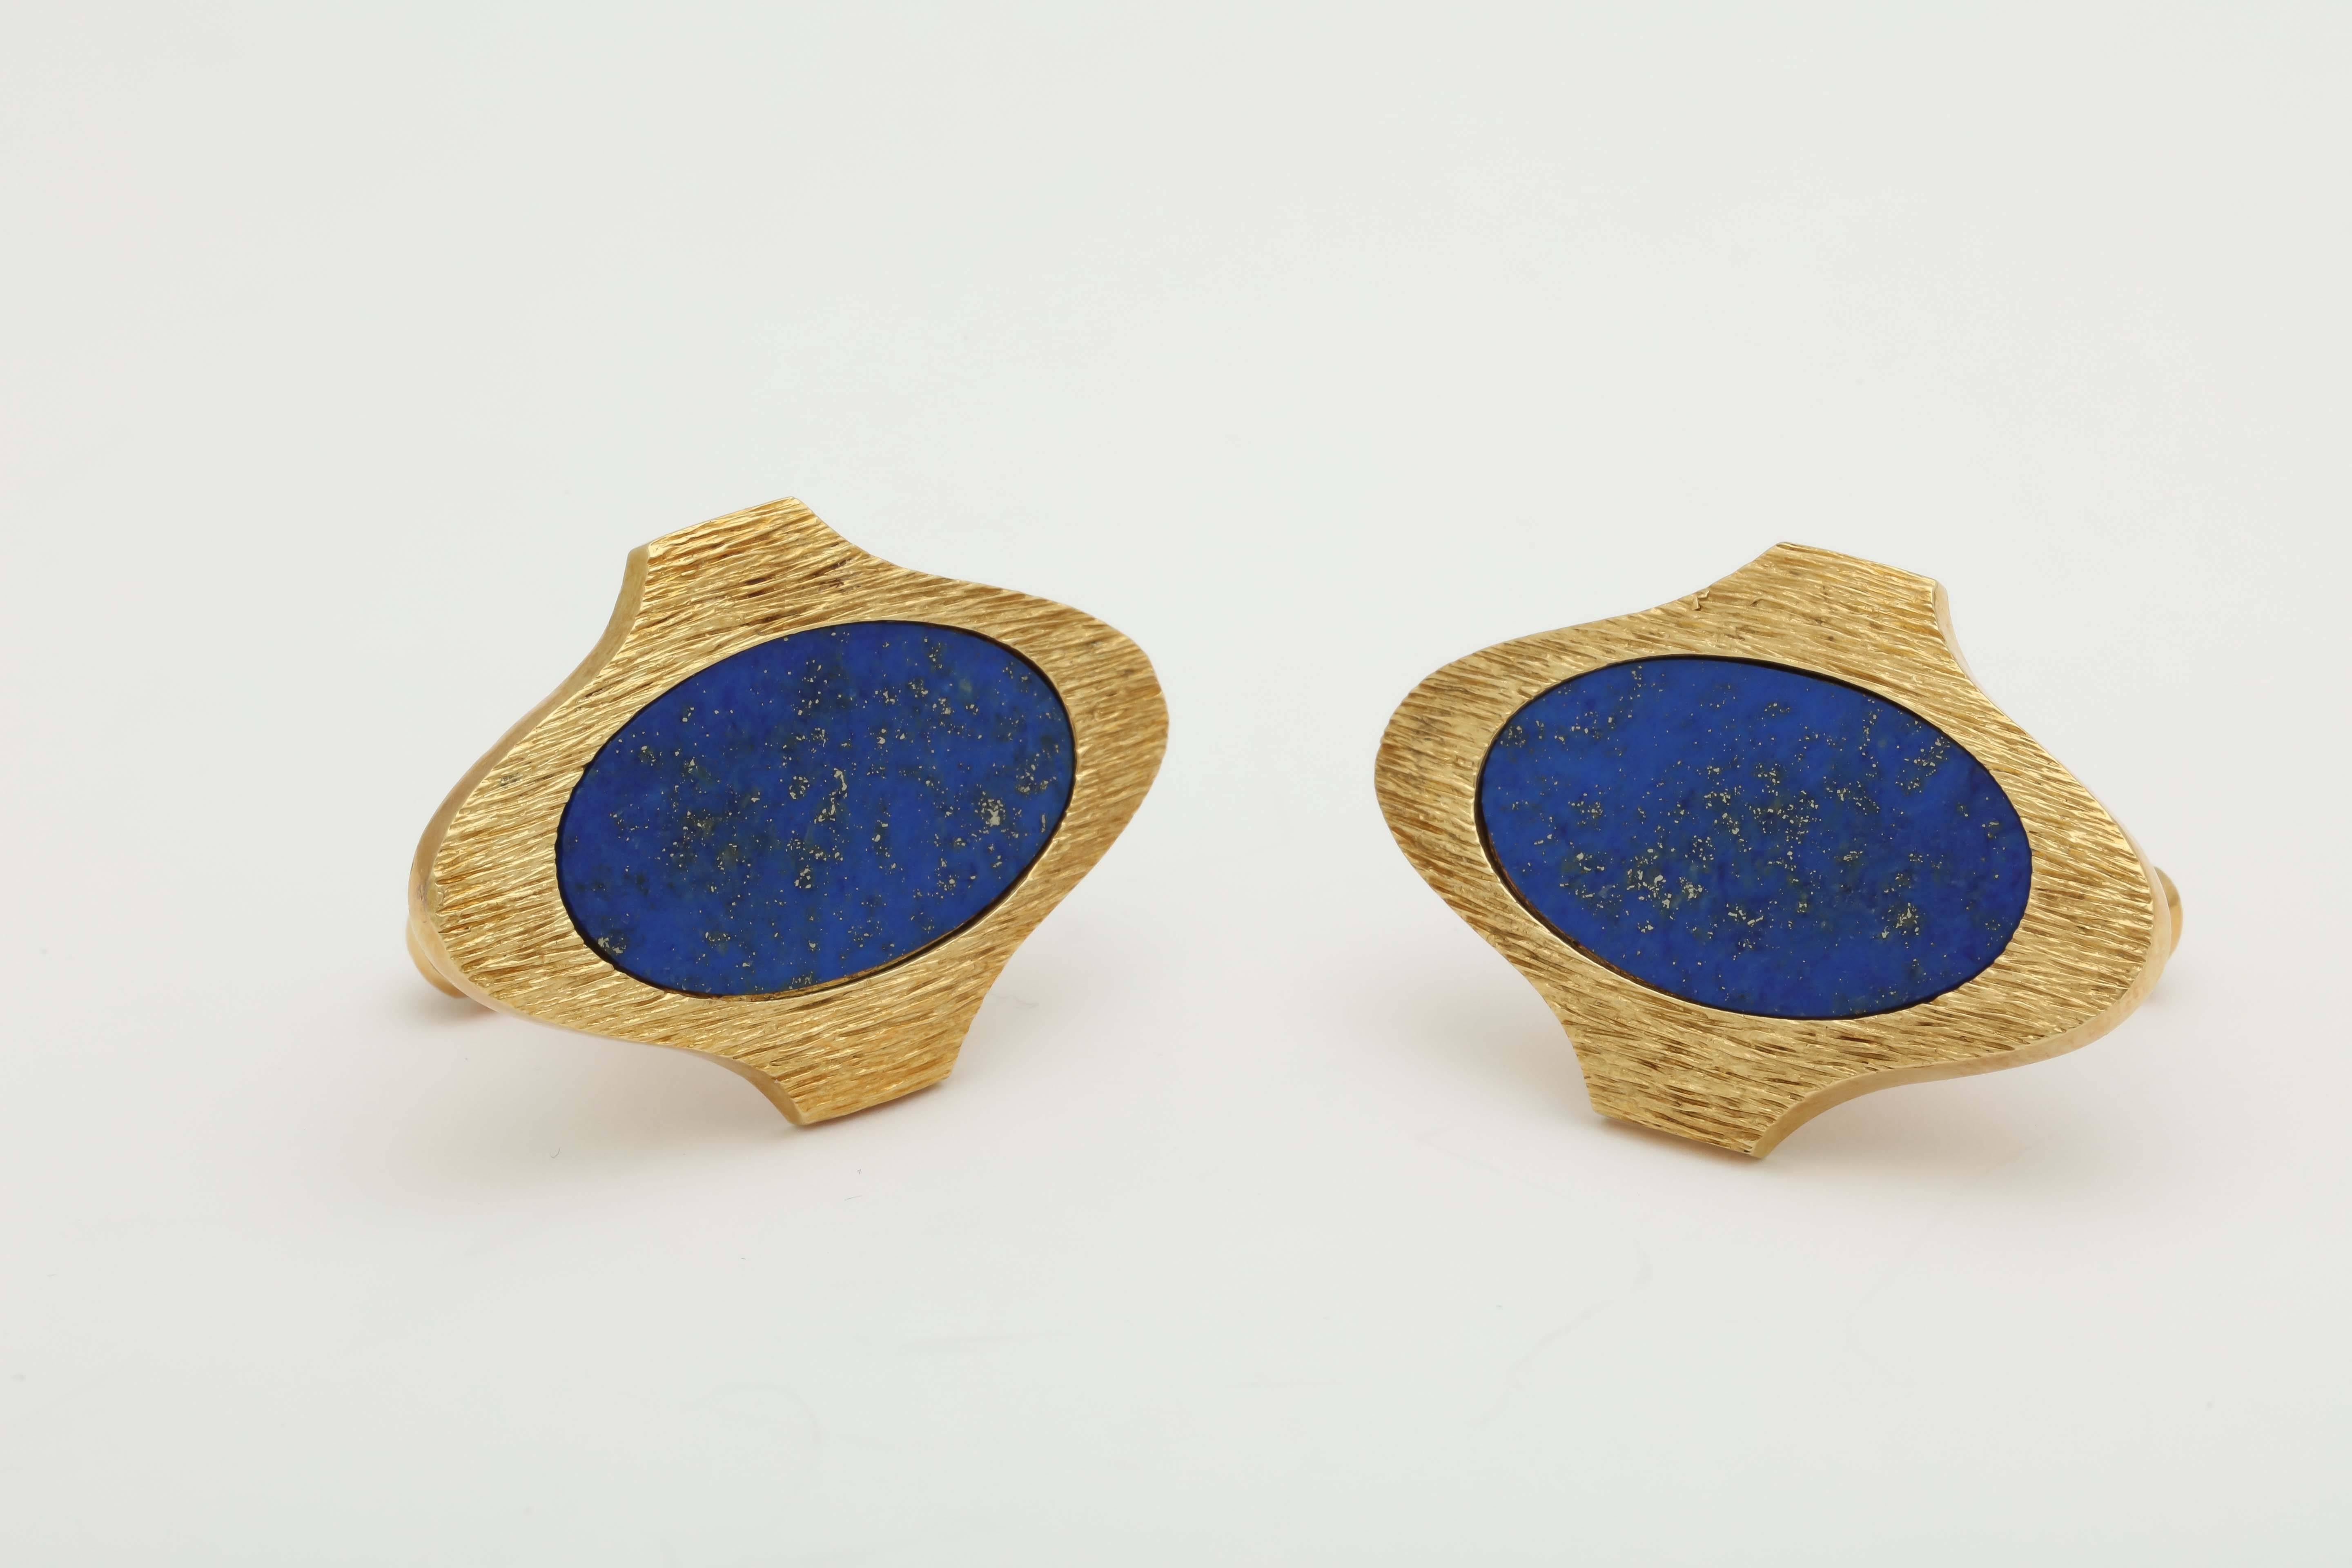 14kt Textured  Yellow Gold Large Cufflinks Centering A 25MM Large Oval Cut Lapis-Lazuli Stone and Designed With a Branch Like Textured Gold Craftmanship. Easy Click-Up On And Off Closure For Easy Wear.